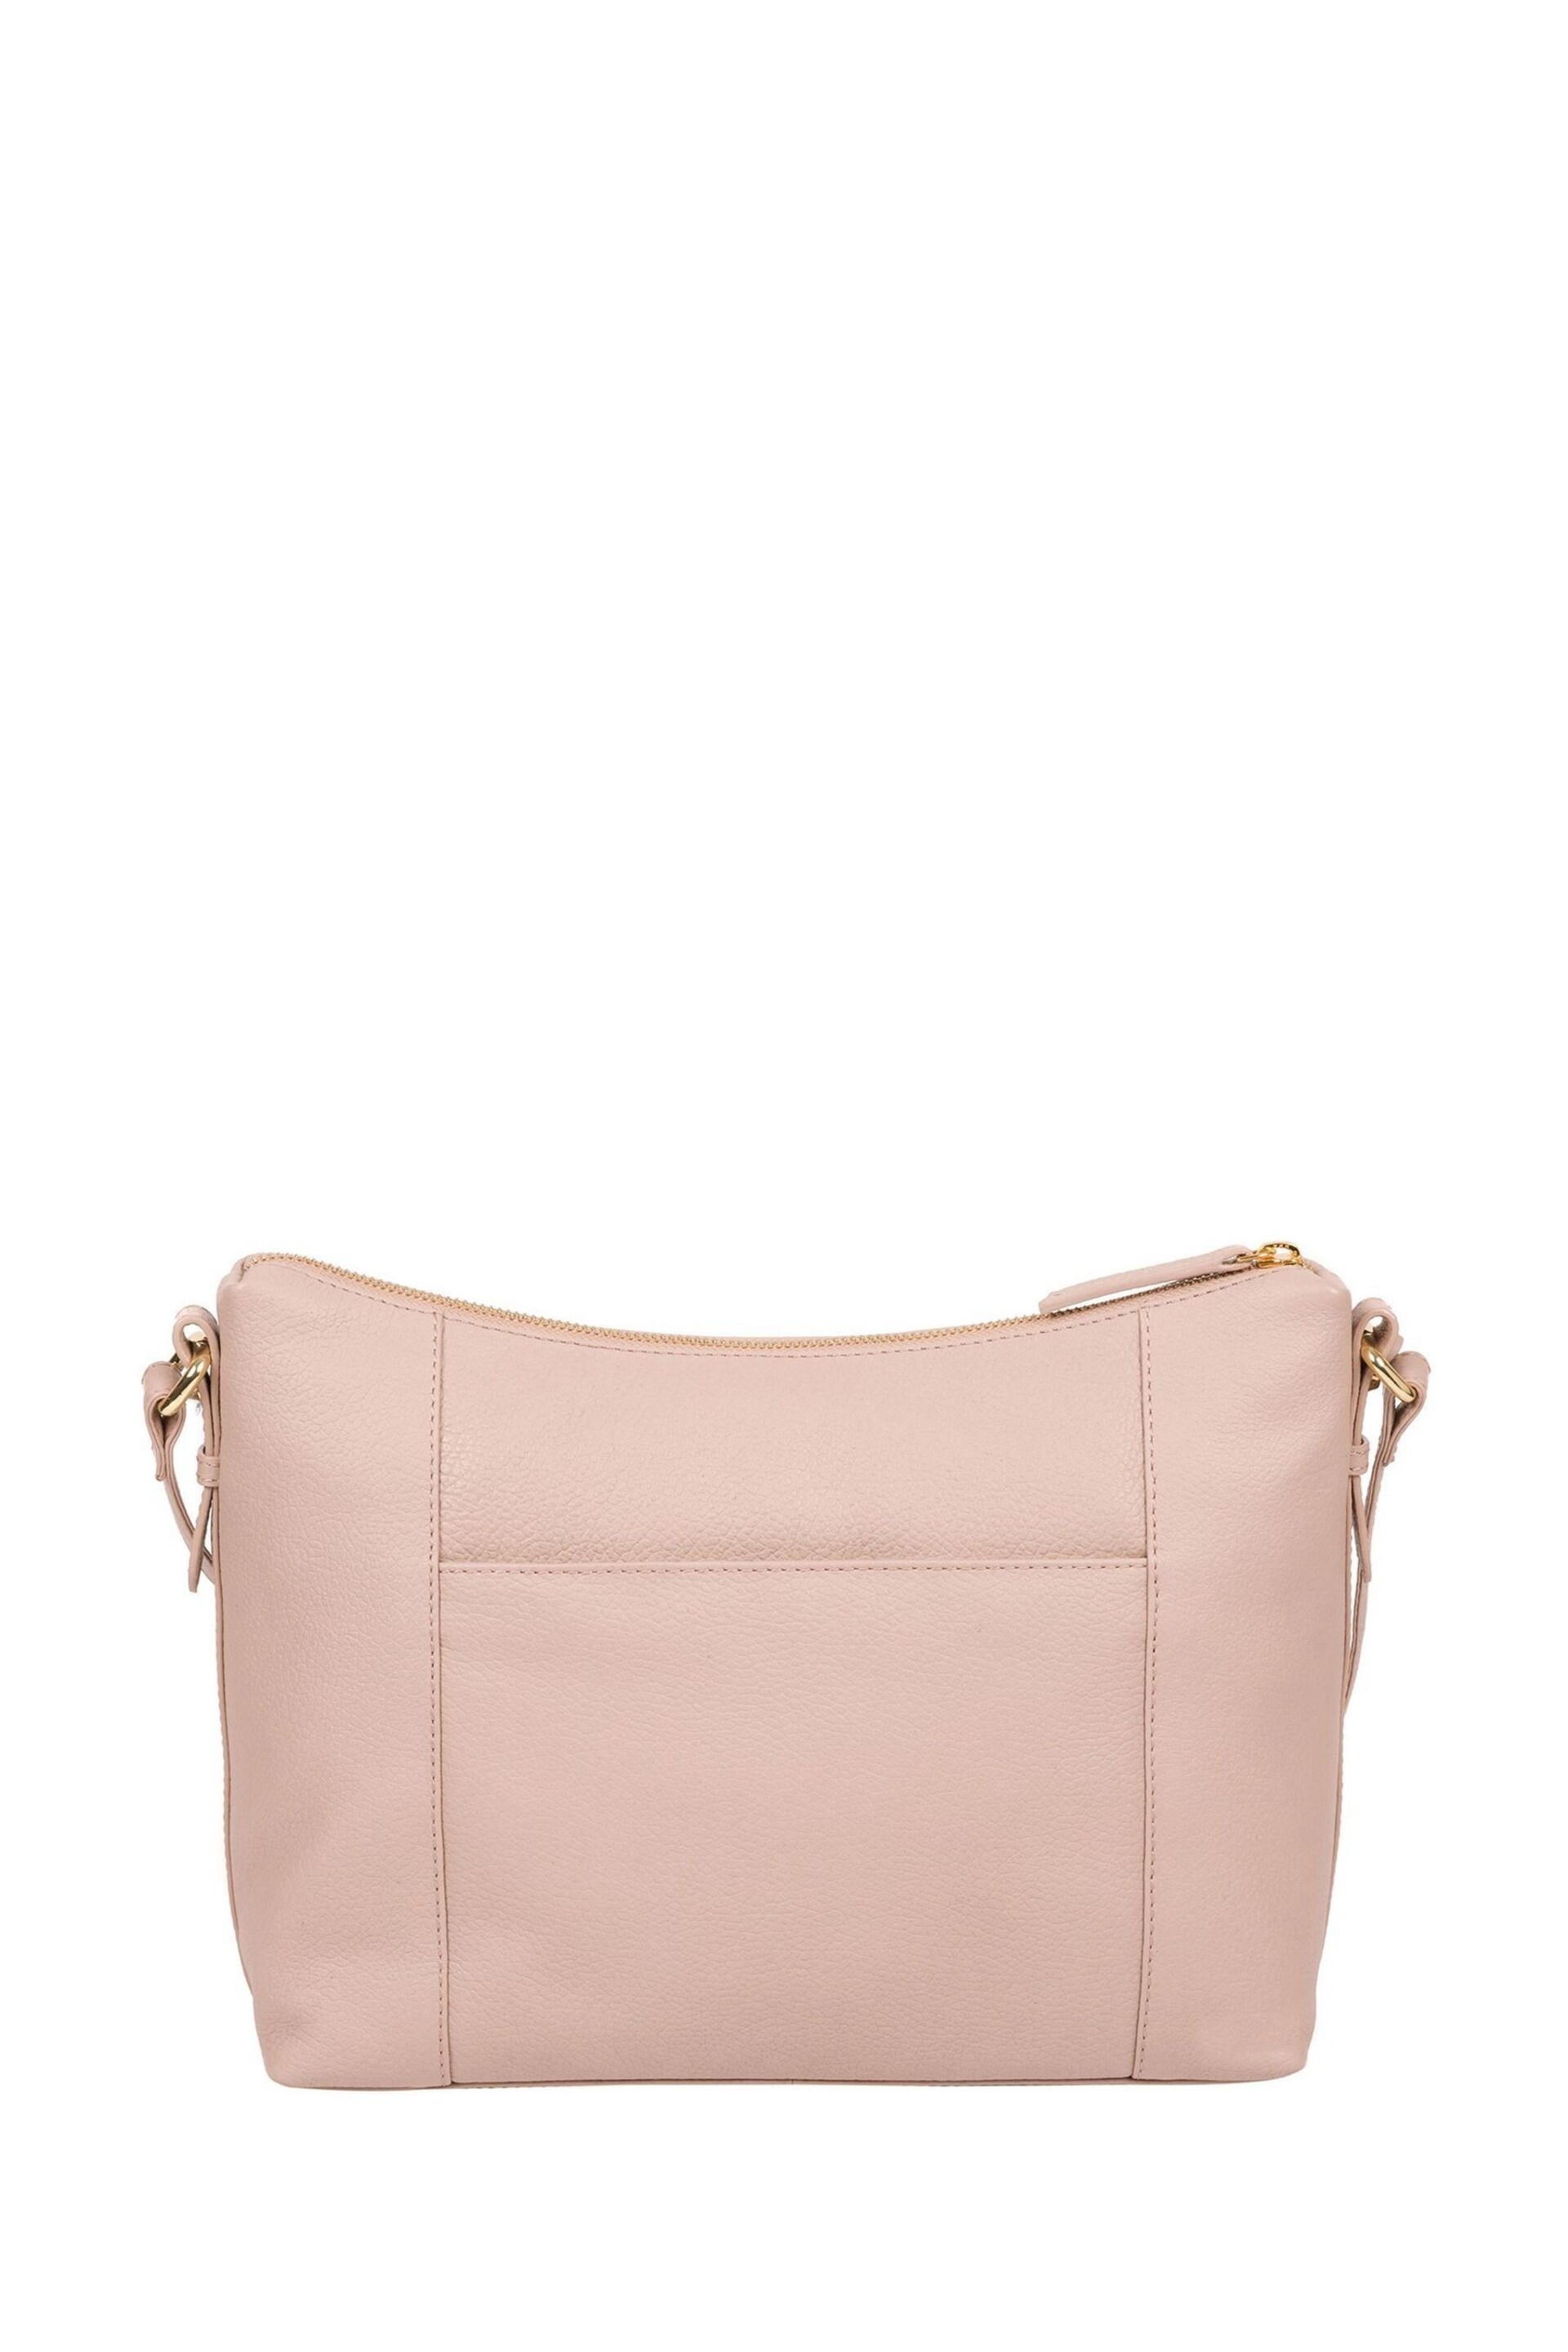 Pure Luxuries London Jenna Leather Shoulder Bag - Image 3 of 5